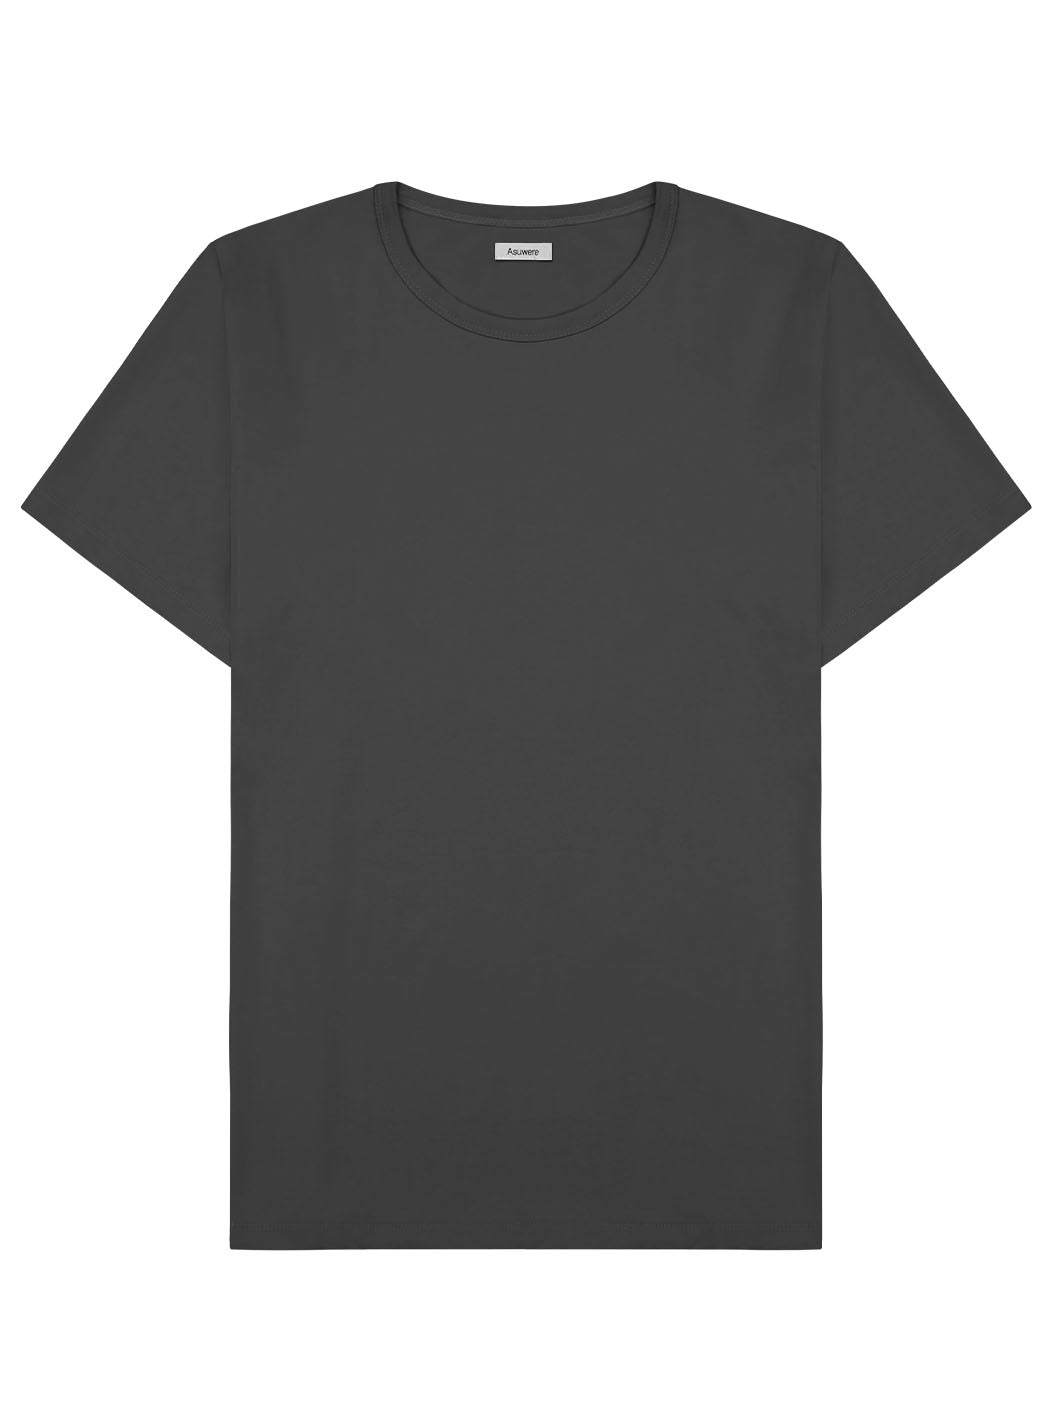 Bound Daily Tee - Charcoal